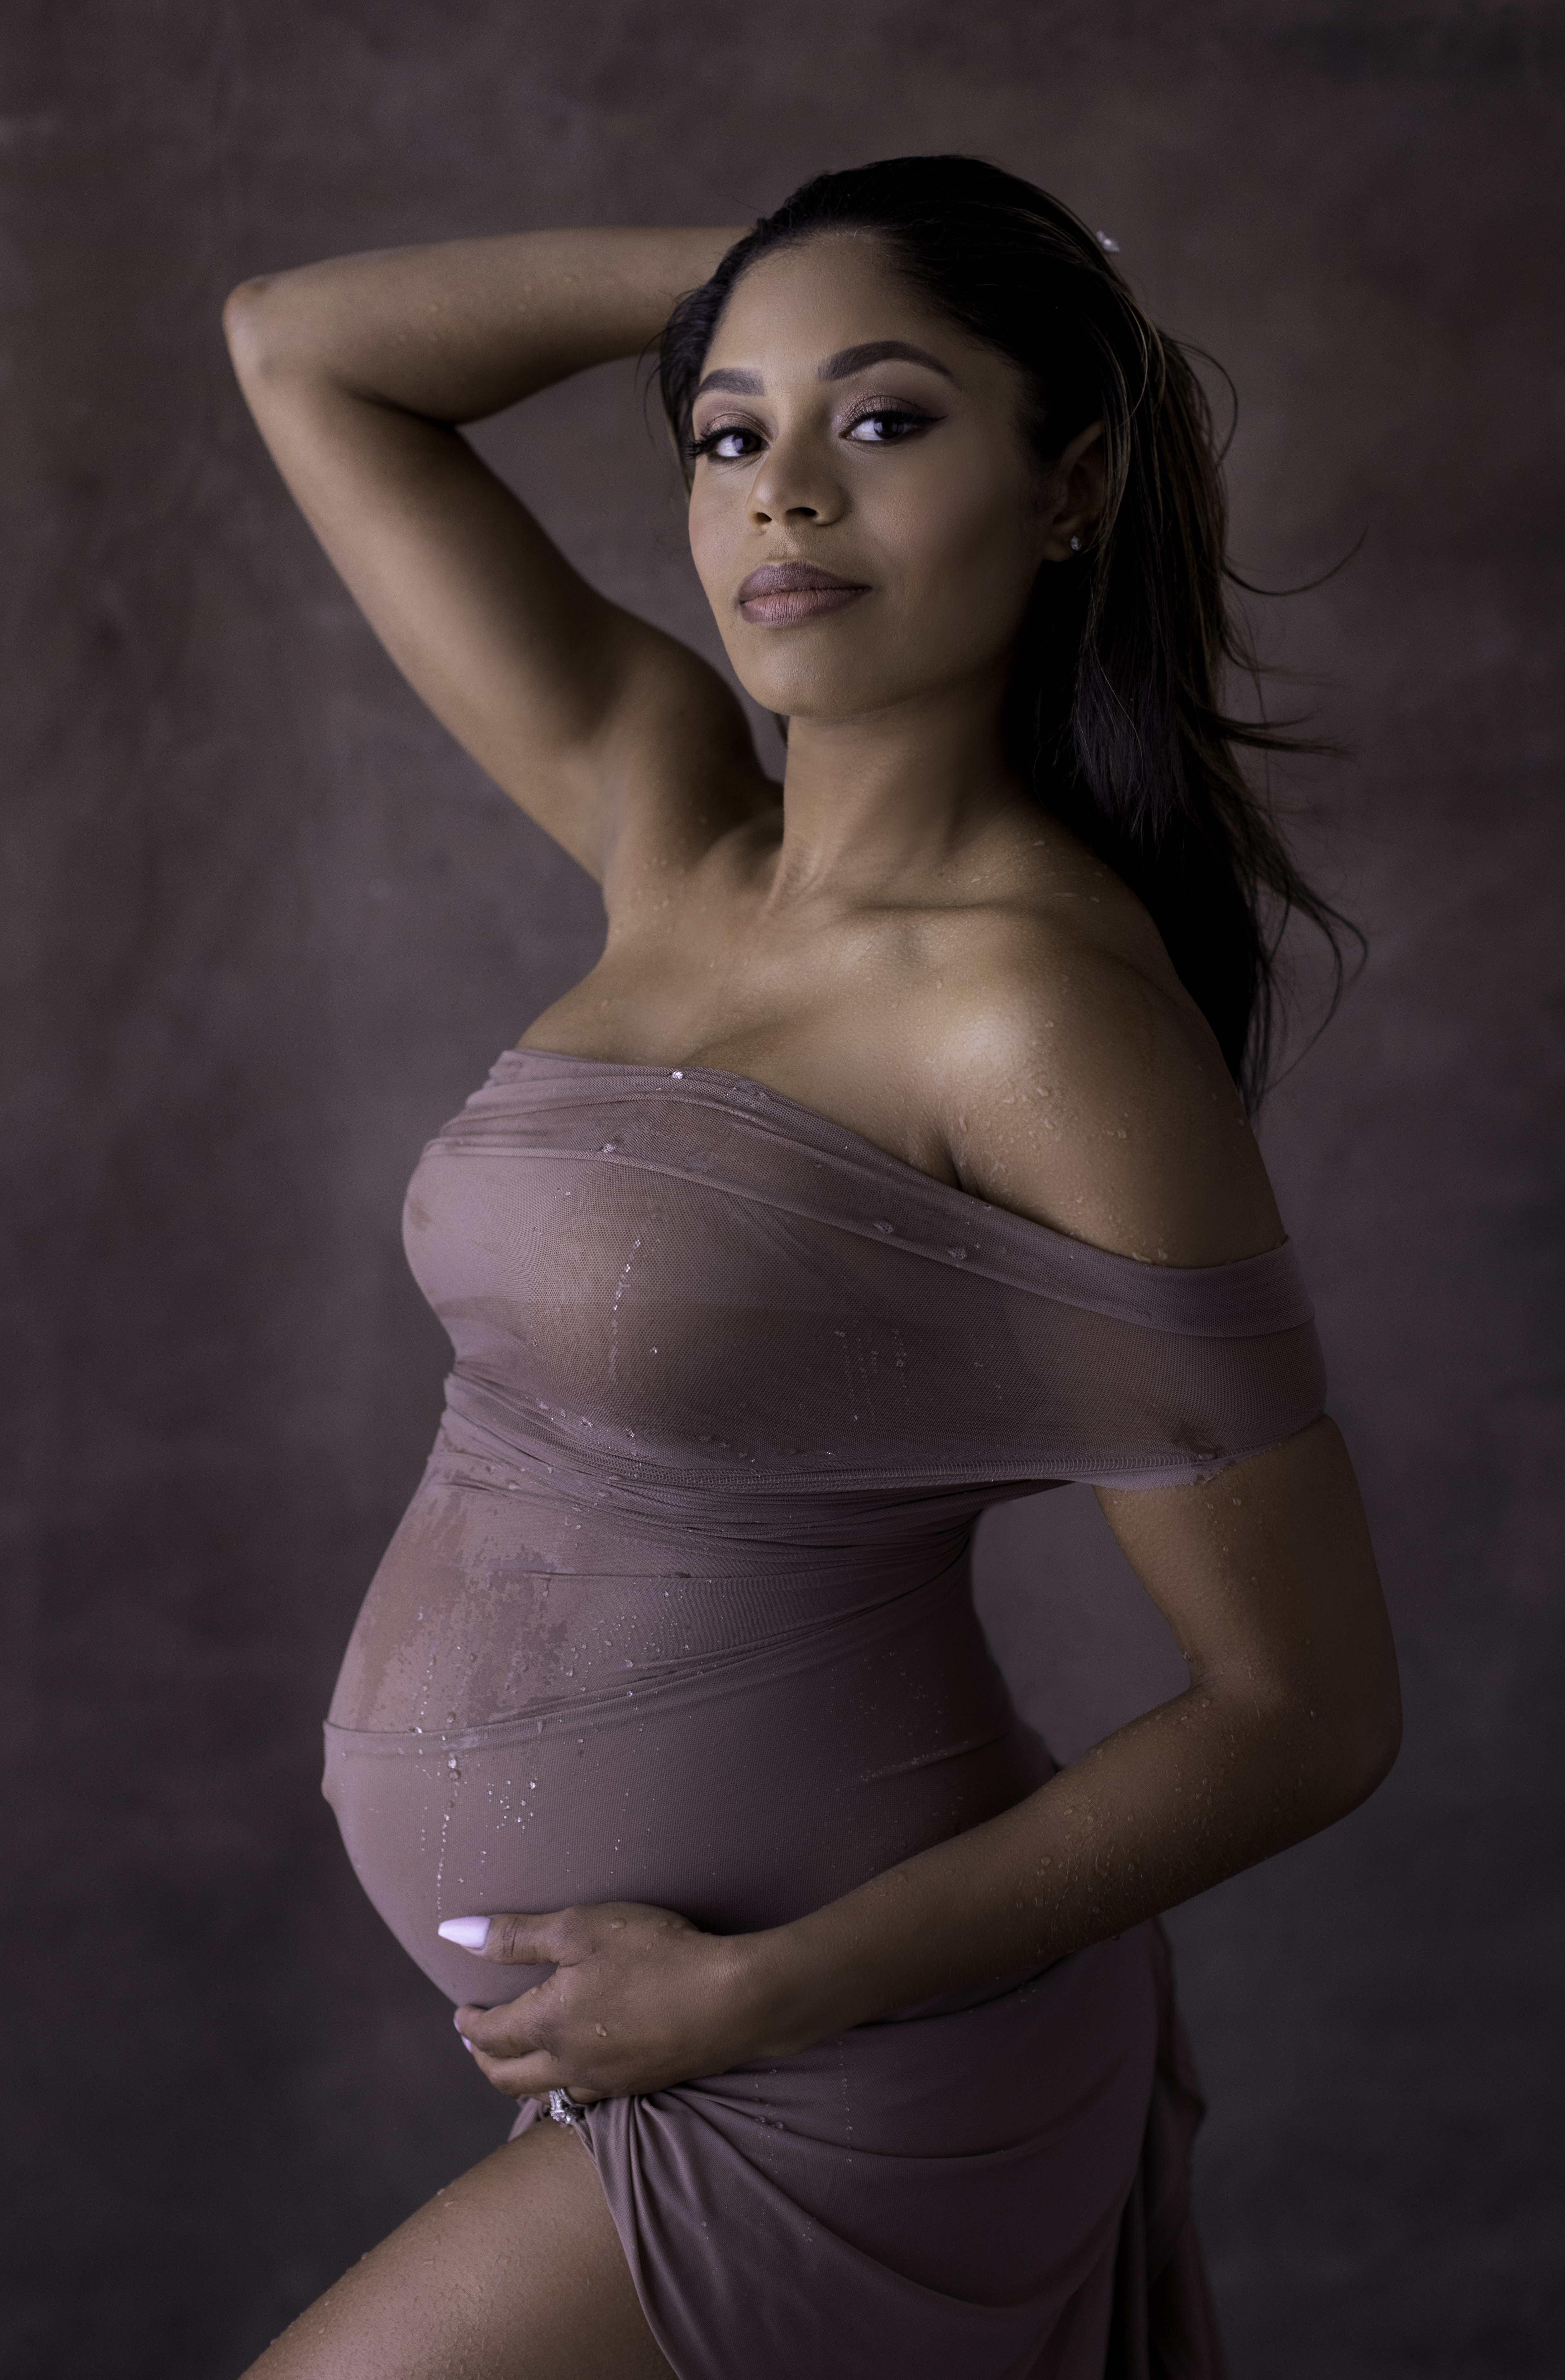 Who in San Diego does professional maternity photography shoots?